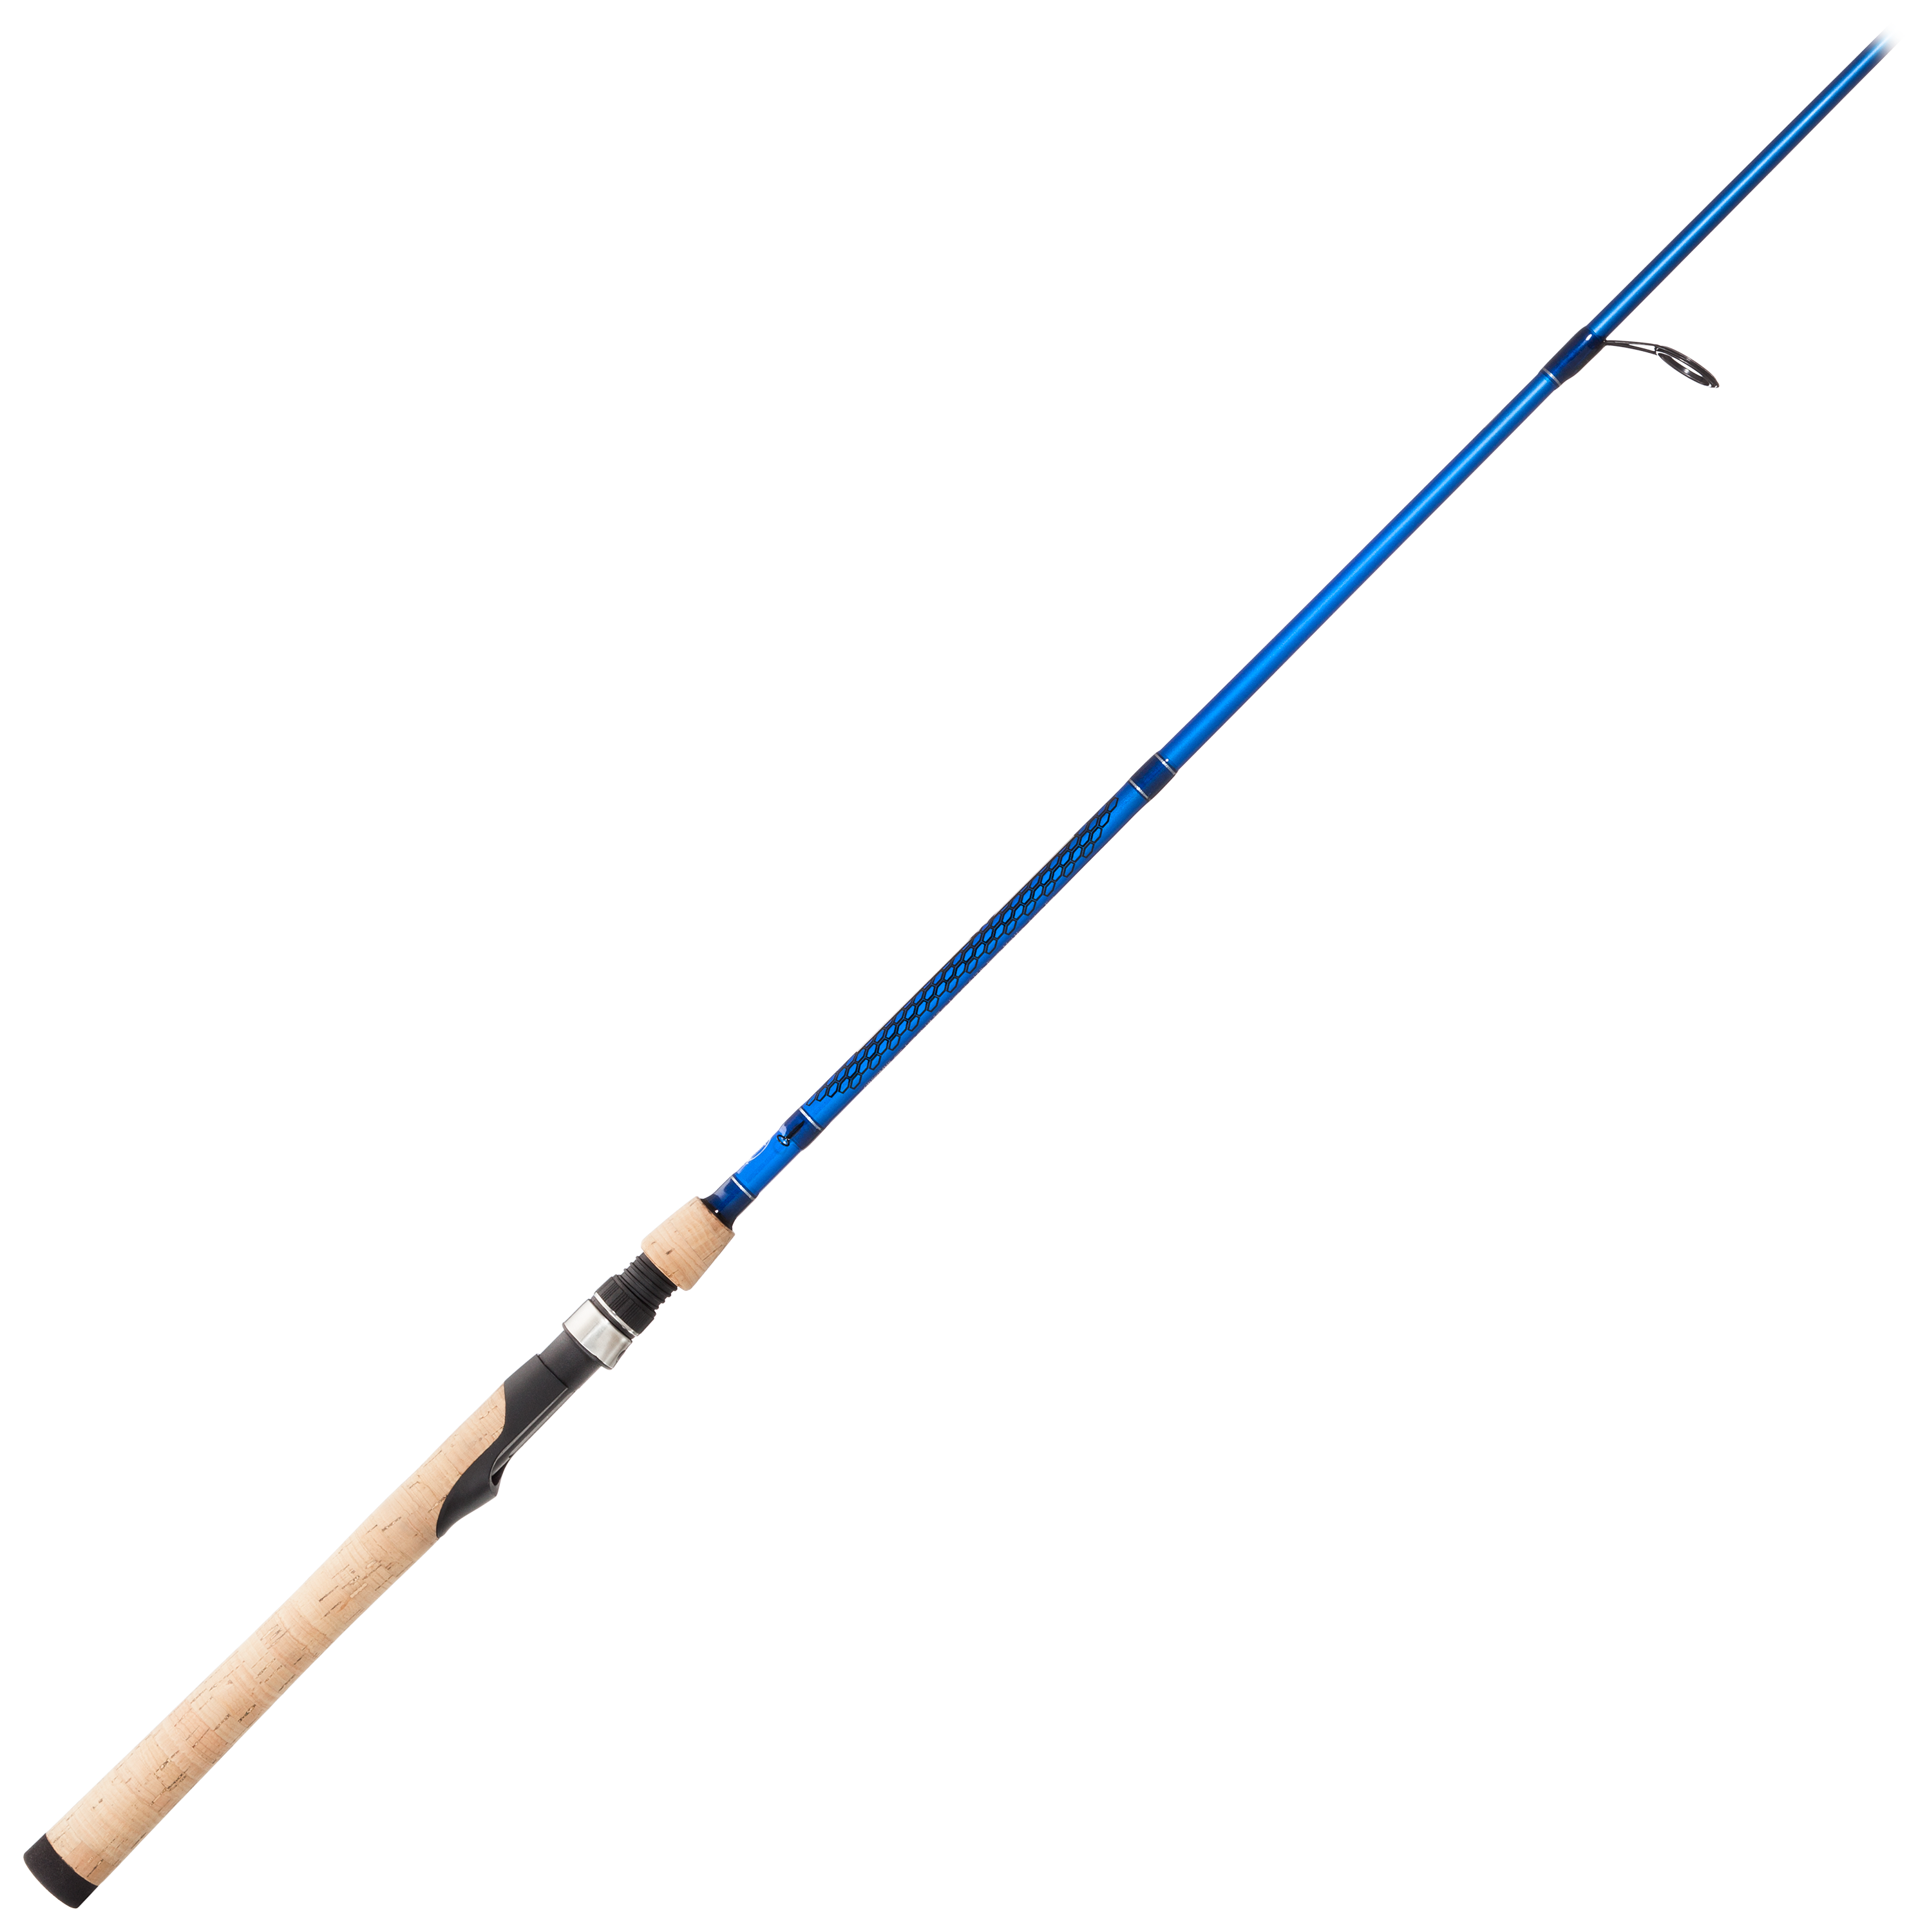 Bass Pro Shops Graphite Series Spinning Rod